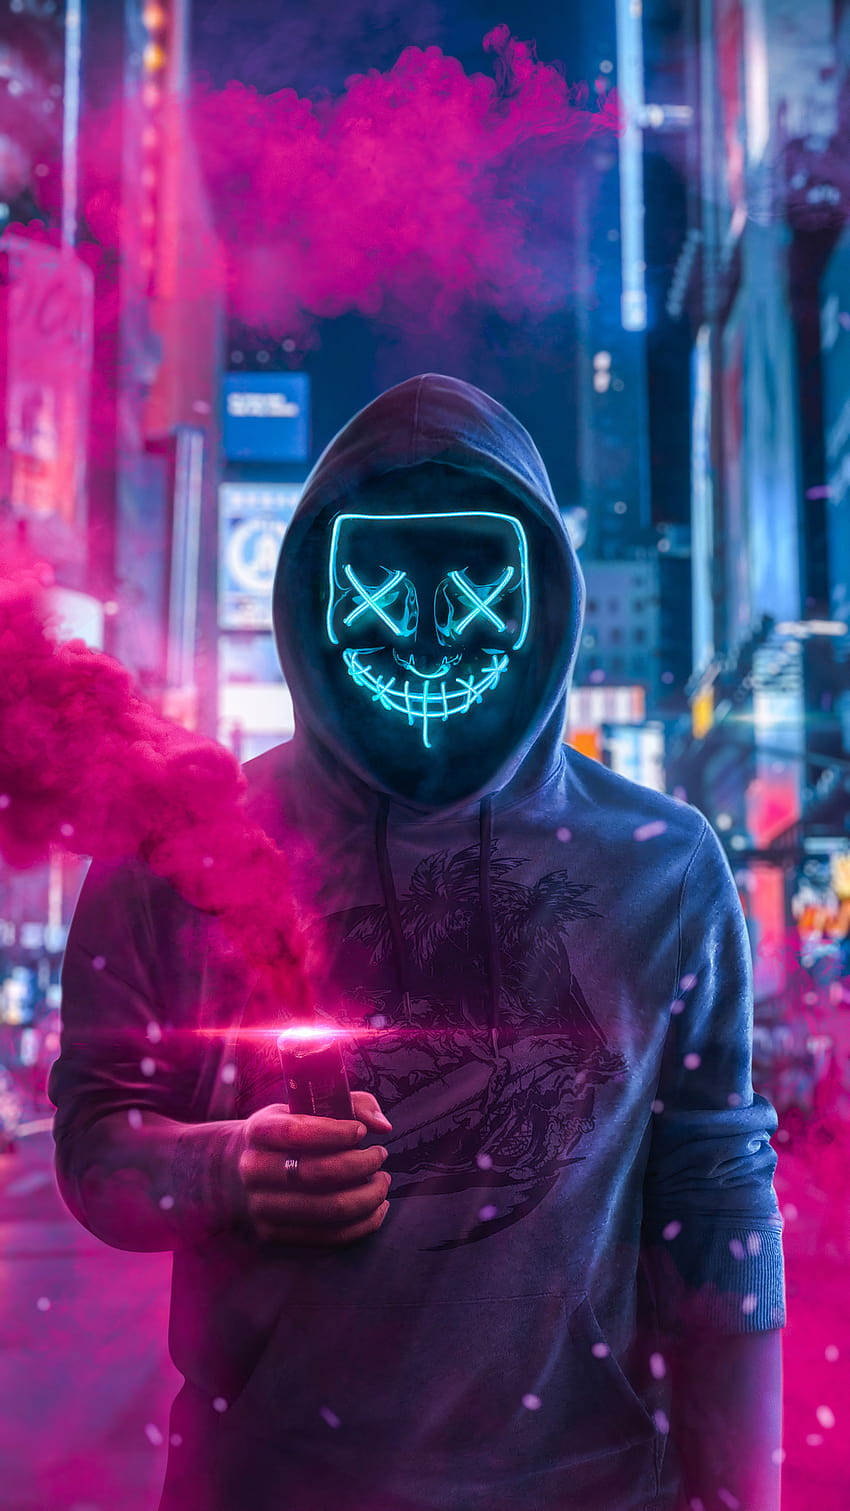 1080x1920 Mask Guy With Smoke Bomb In Hand Iphone 7,6s,6 Plus, Pixel xl ,One Plus 3,3t,5 , Backgrounds, and, pink smoke bomb HD phone wallpaper